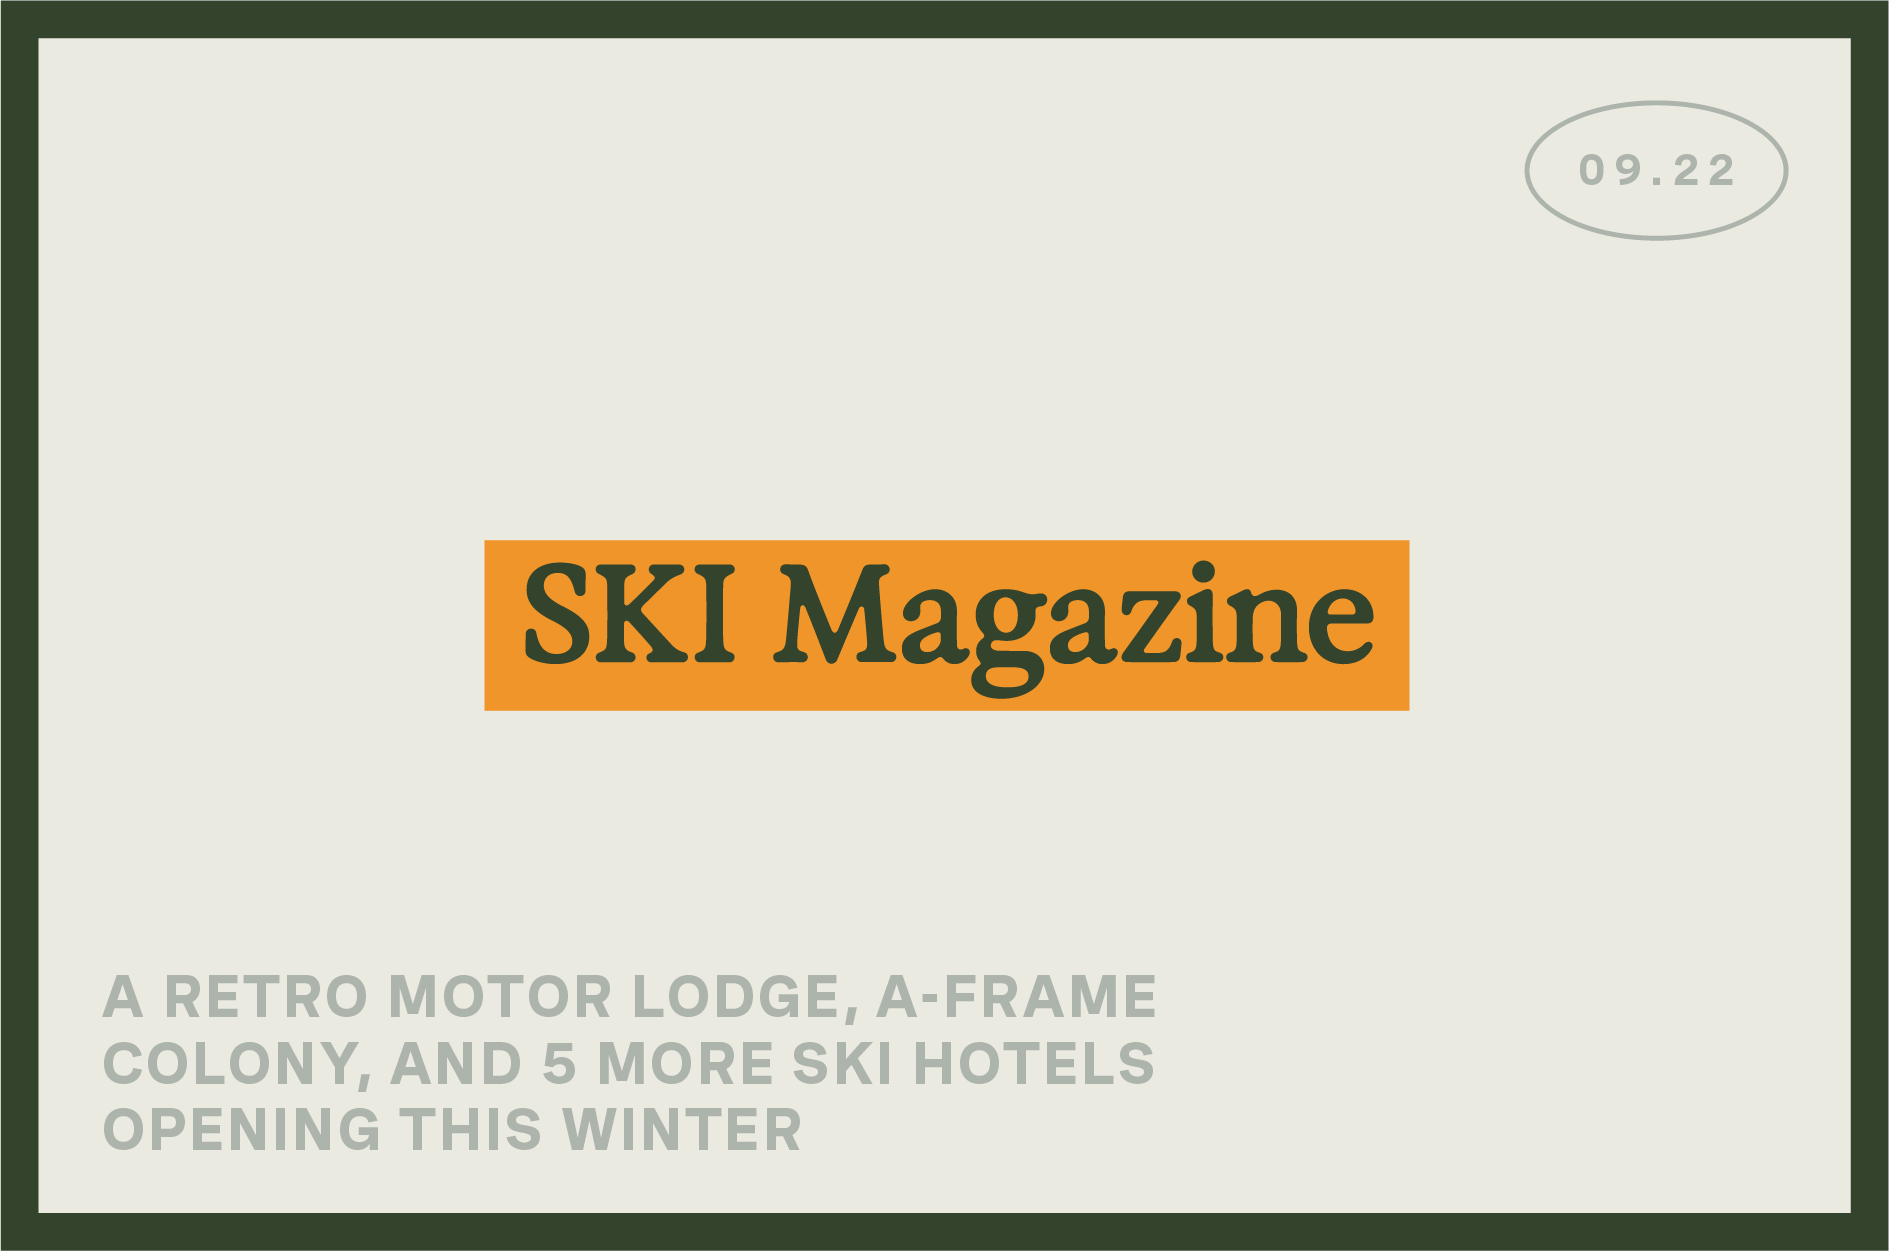 "SKI Magazine" banner highlights "A Retro Motor Lodge, A-Frame Colony, and 5 more SKI Hotels opening this winter."